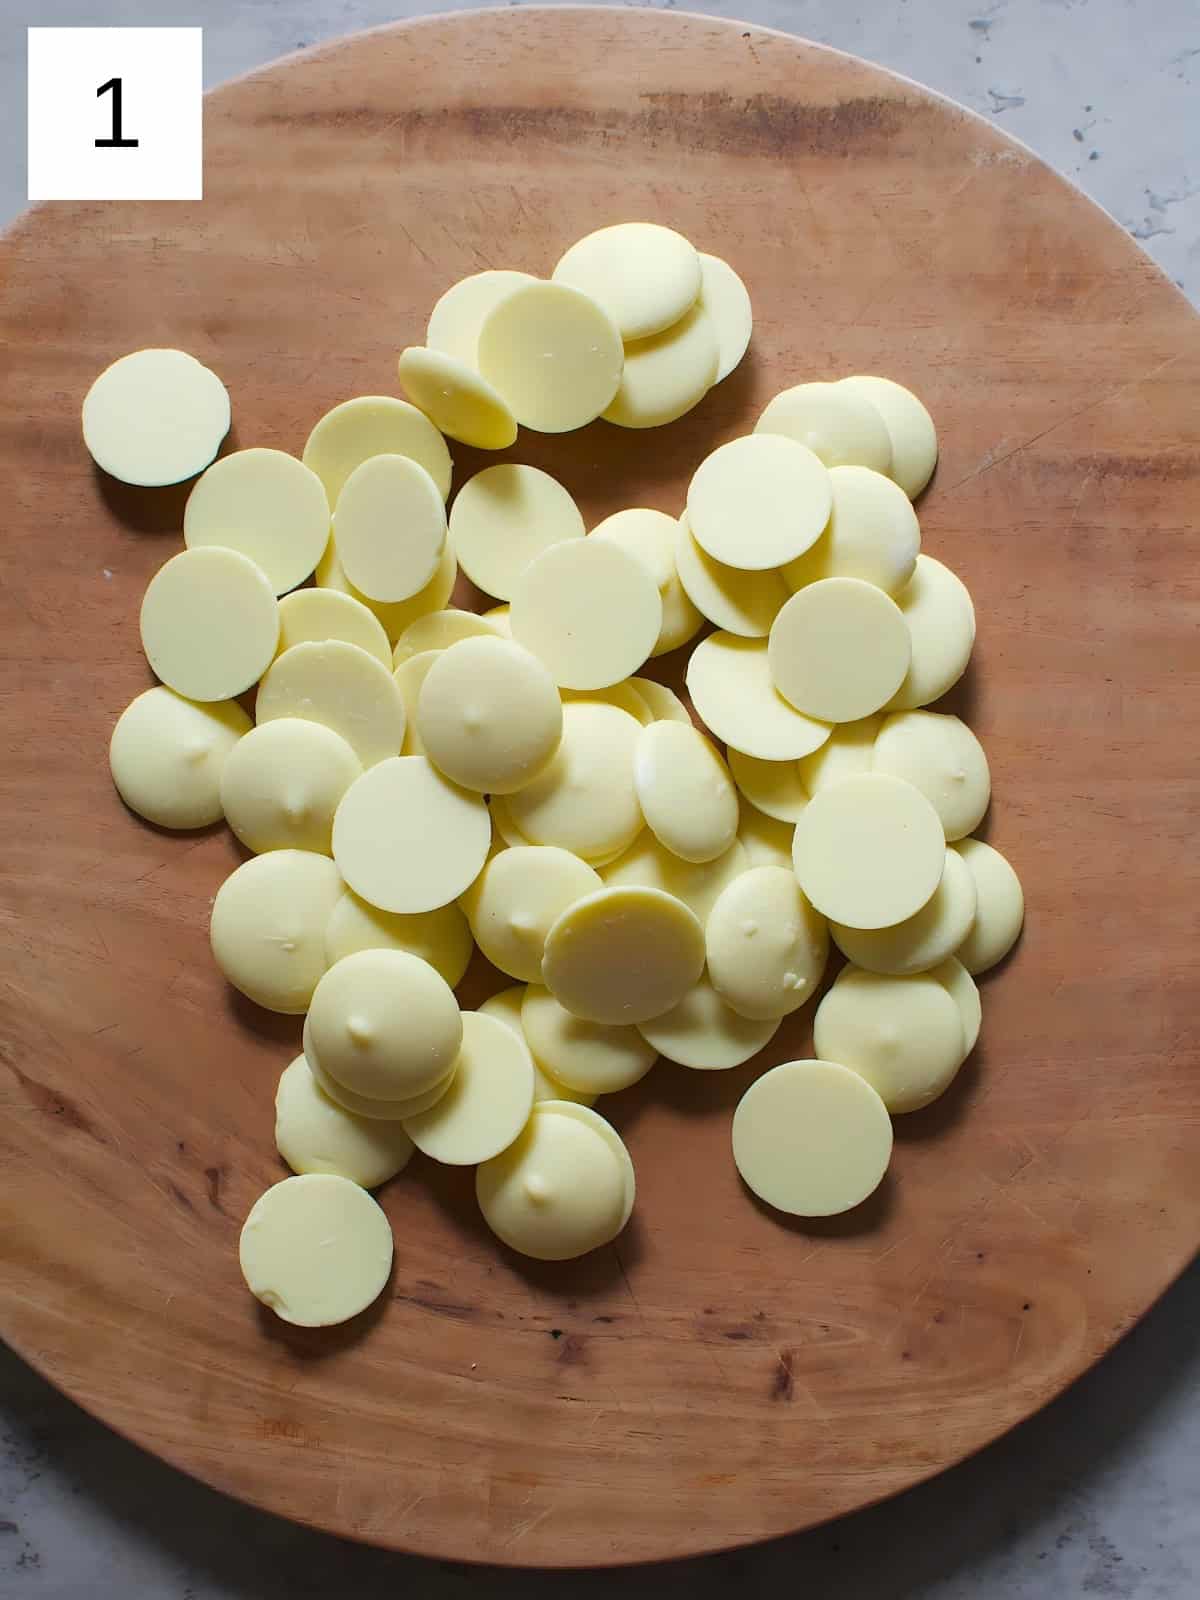 A bunch of disk shaped white chocolates on a wooden board.